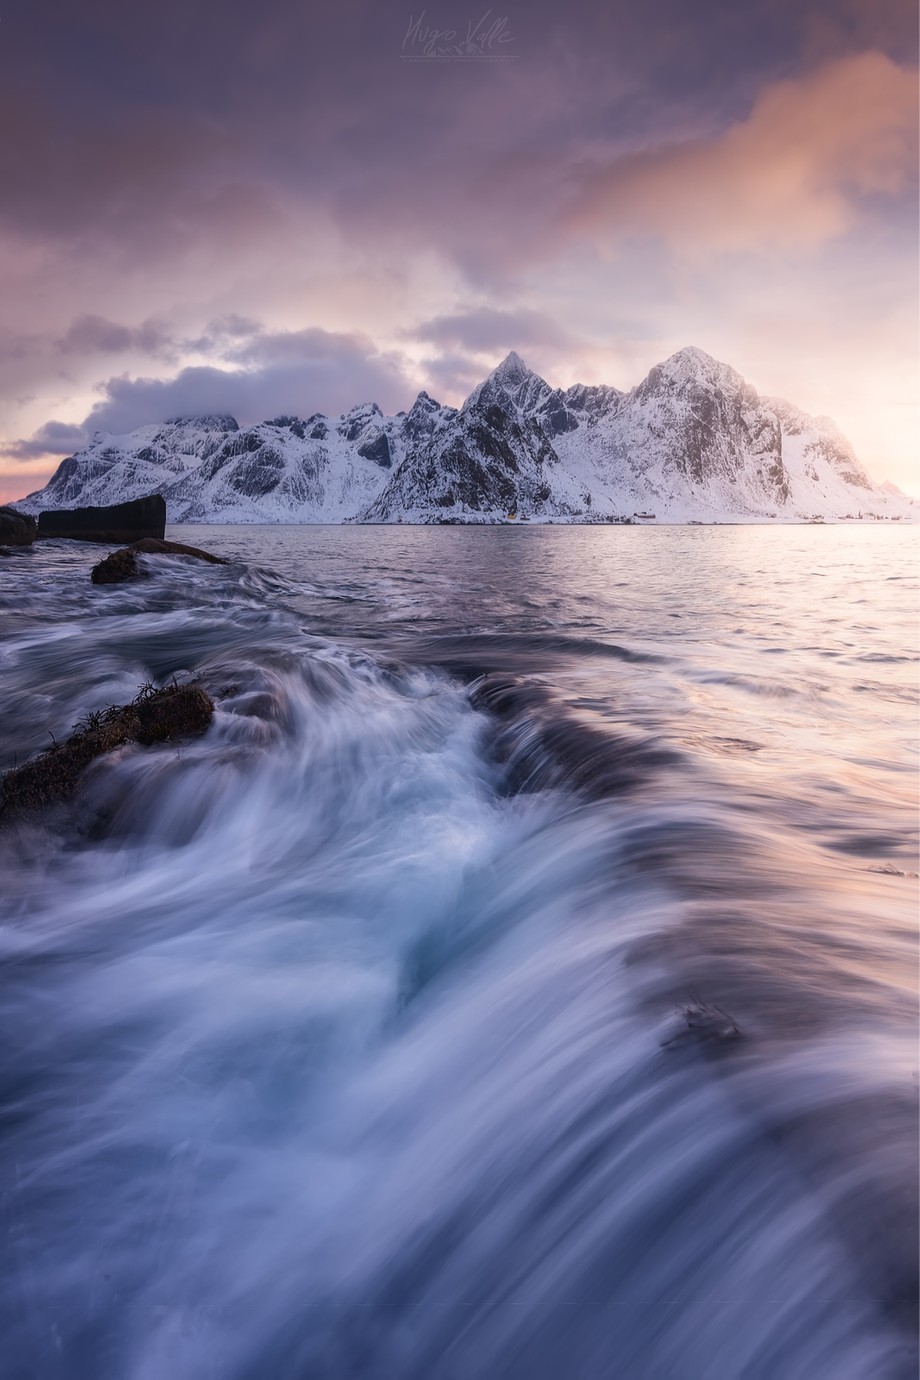 Into the Artic Seas by Hugo_Valle - Image Of The Month Photo Contest Vol 29